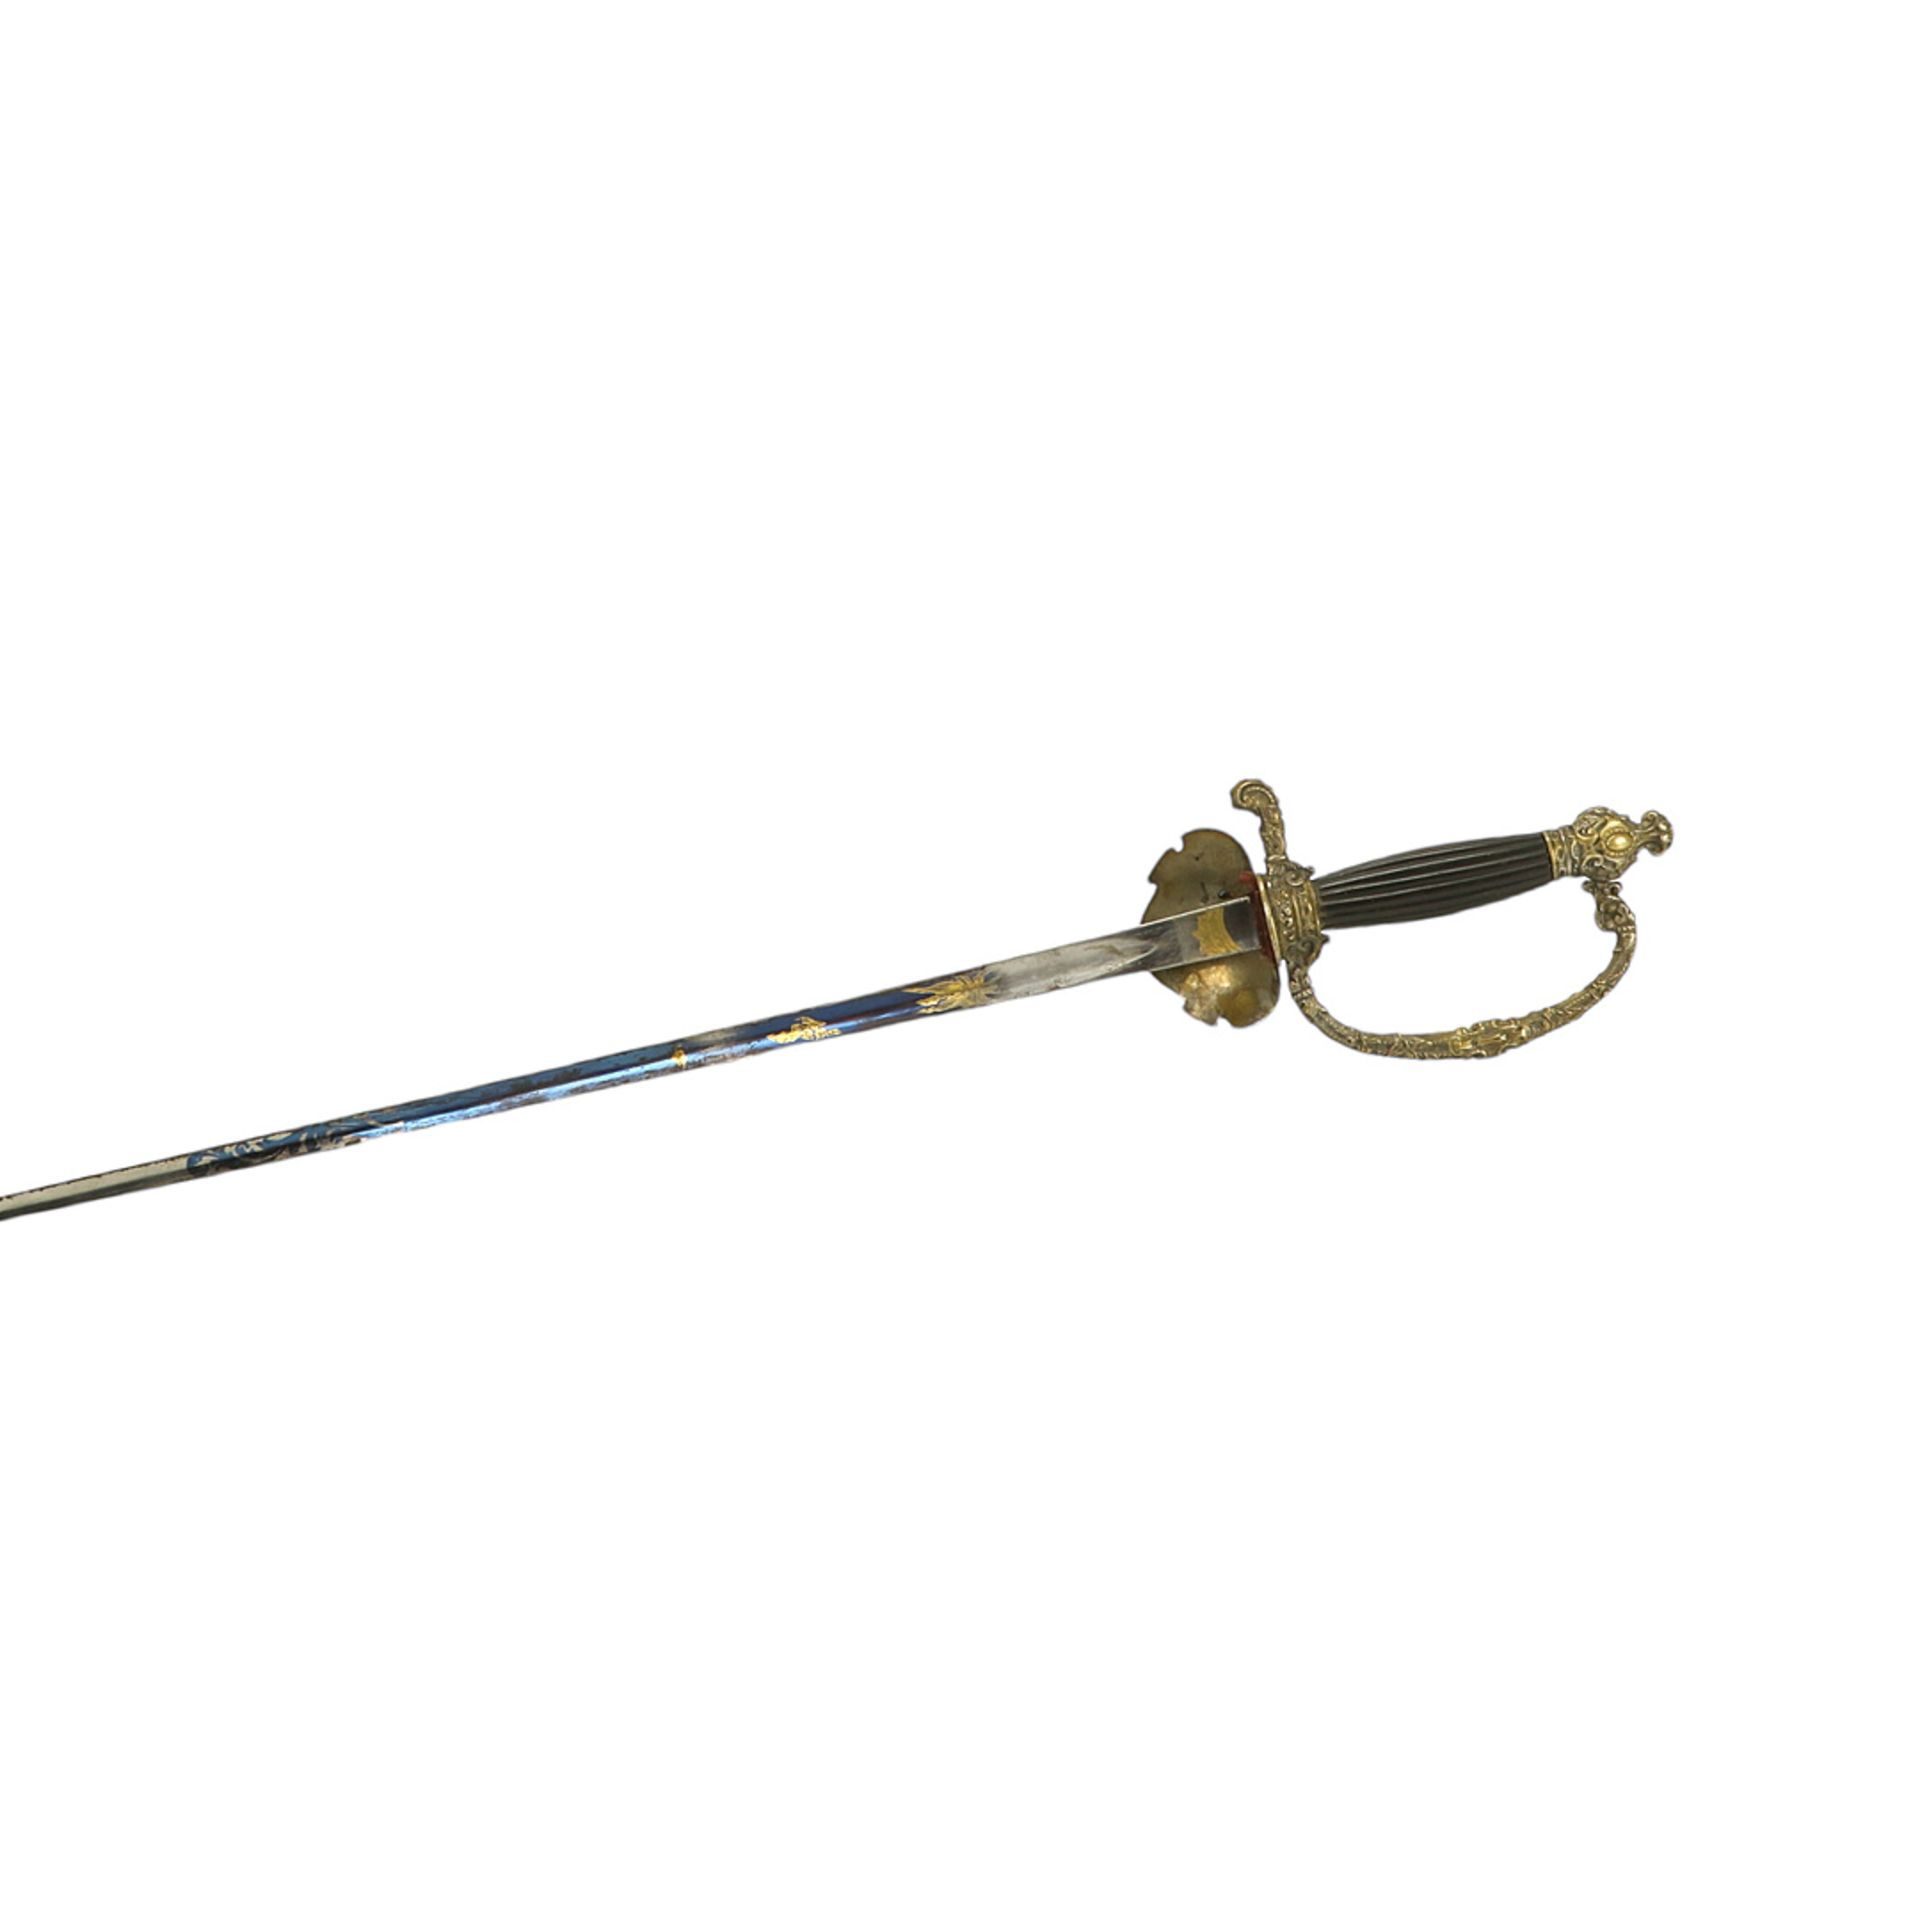 French officer's sword, around 1830 - Image 2 of 3